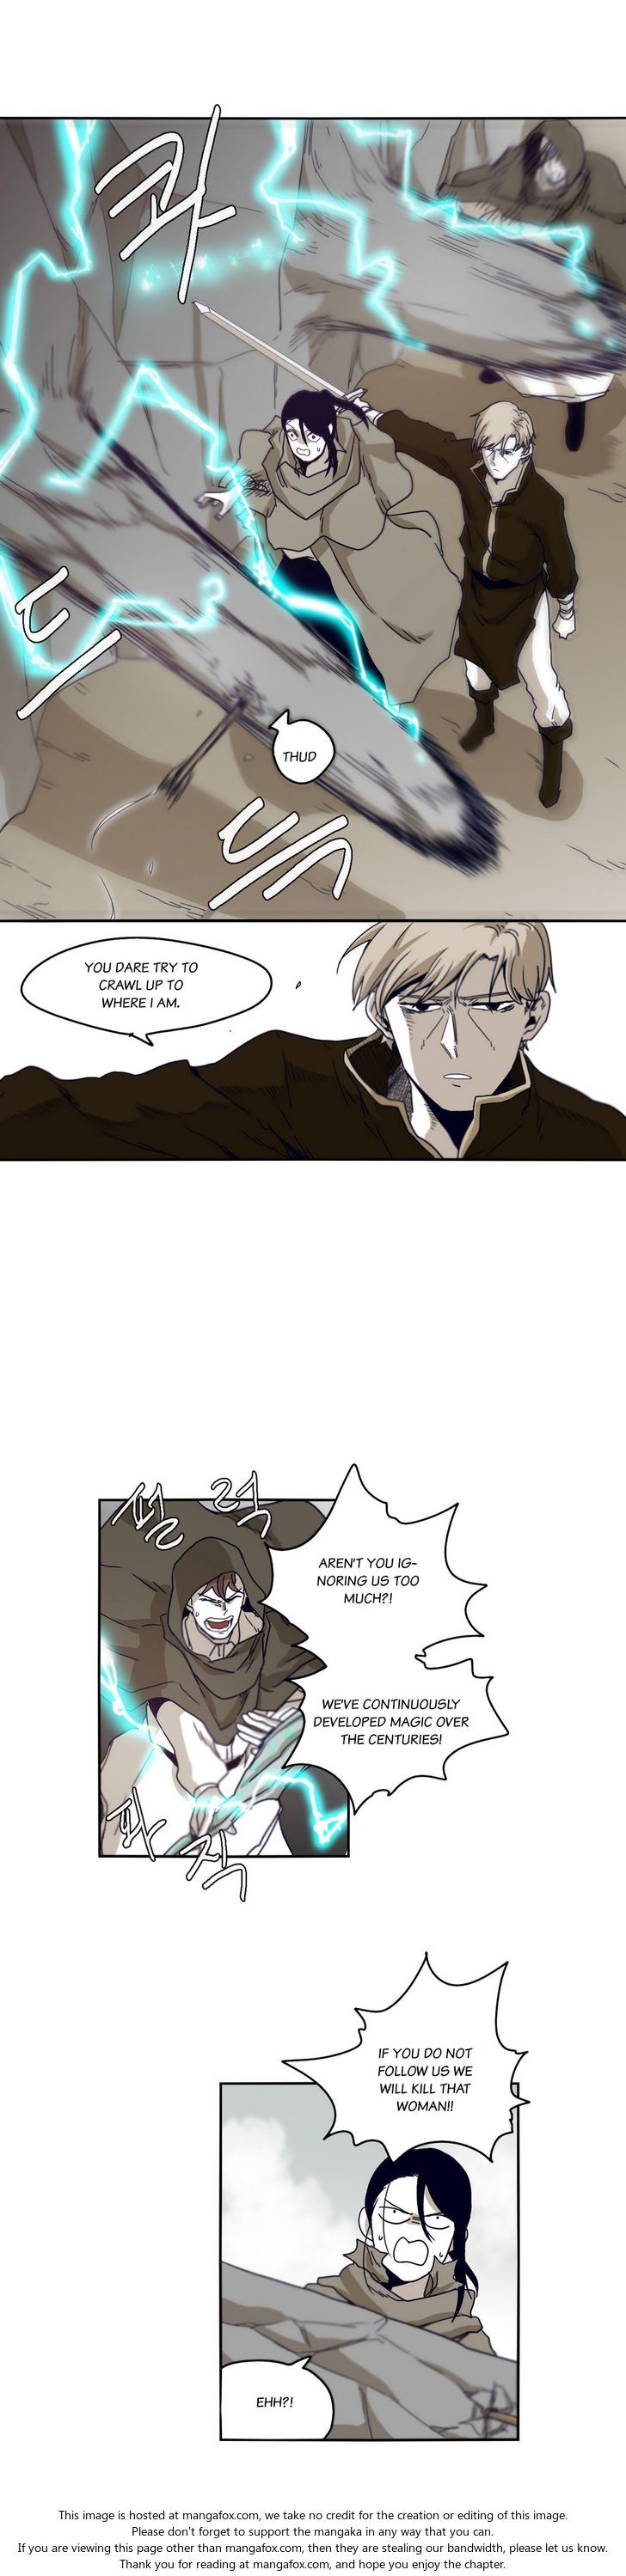 Epic of Gilgamesh Chapter 037 page 14